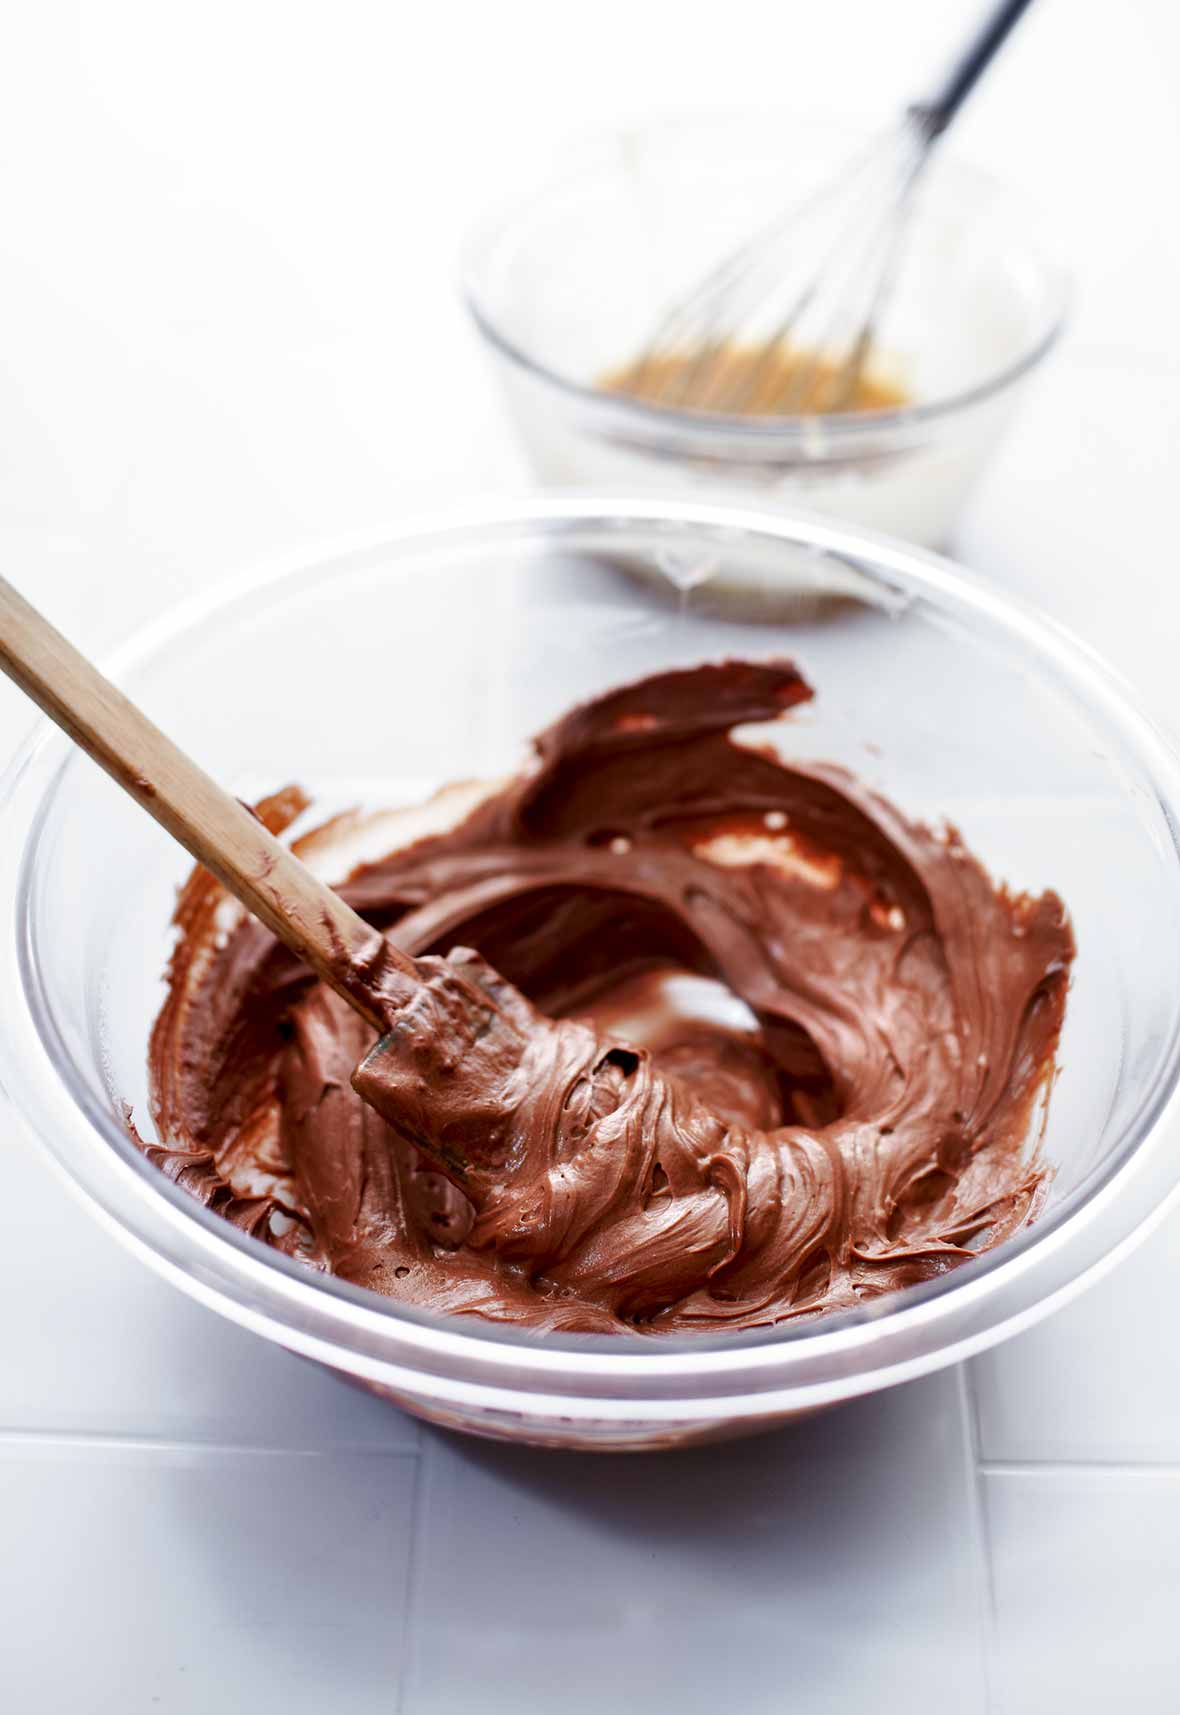 A glass mixing bowl filled with homemade nutella and a spatula rests inside the bowl